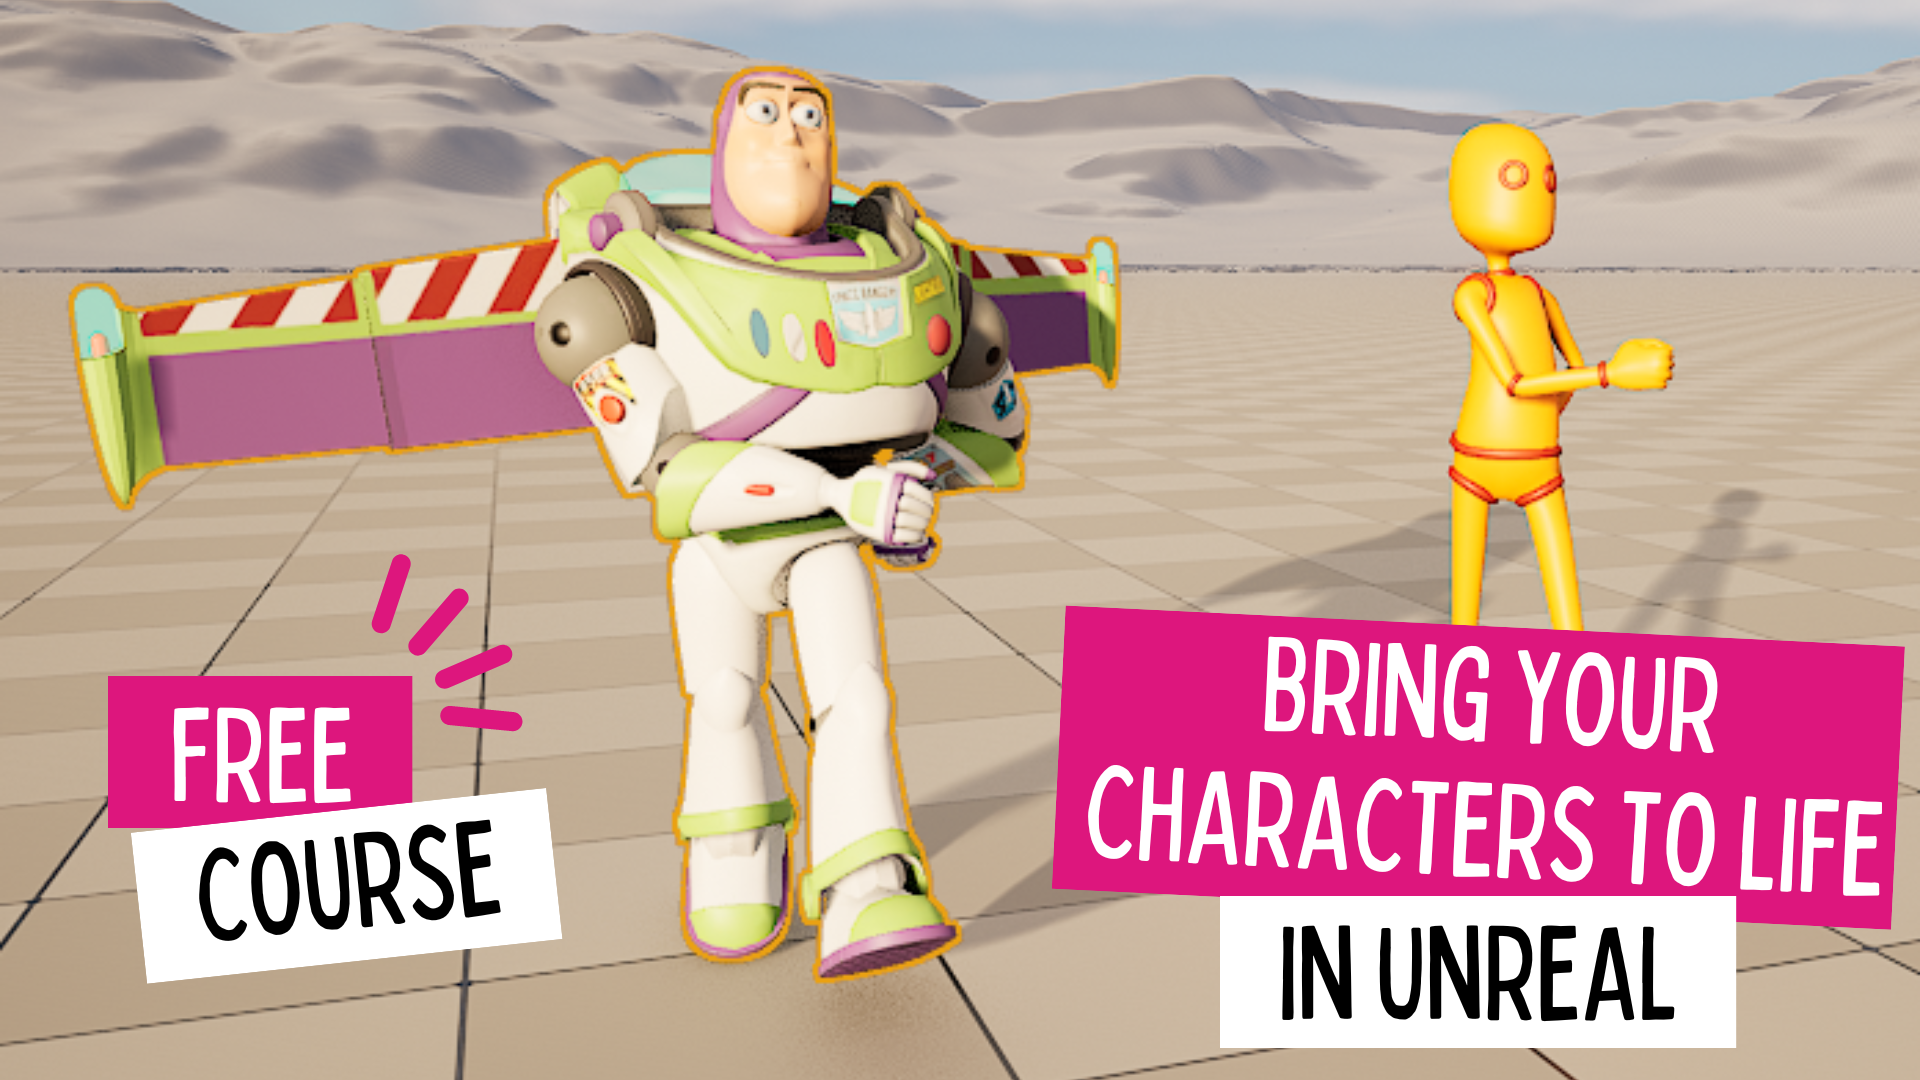 Bring your characters to life in Unreal